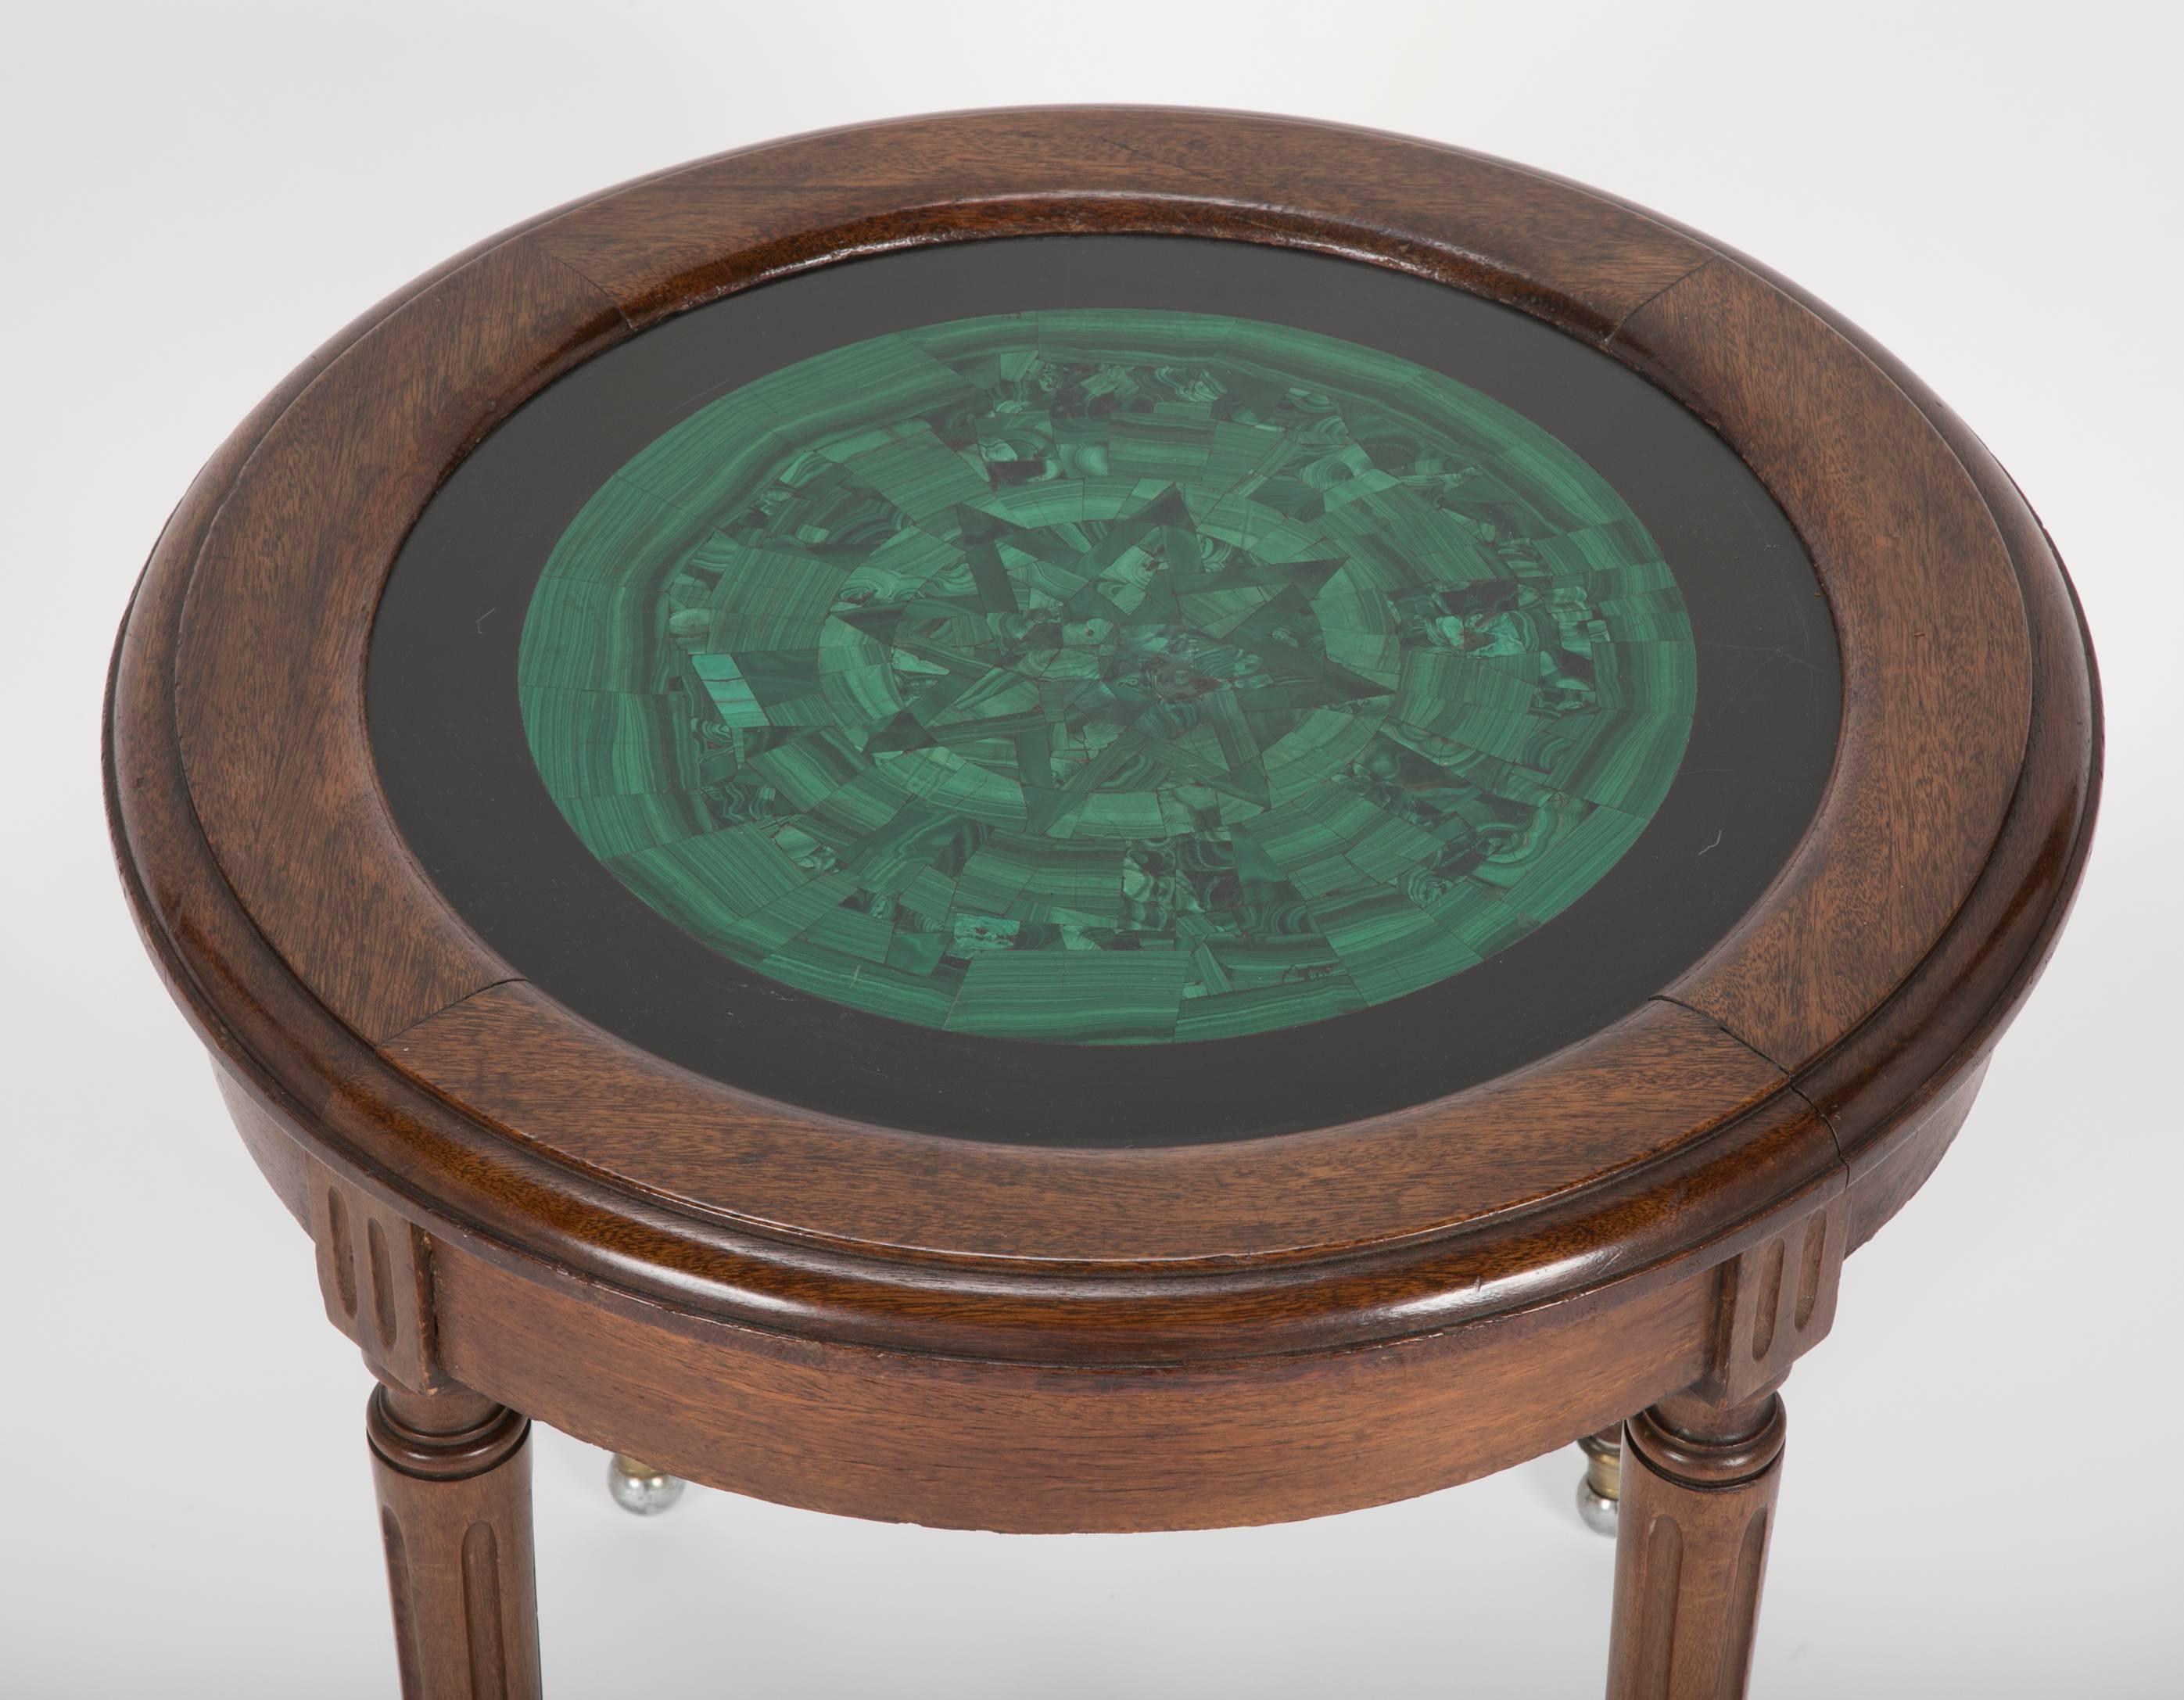 French Louis XVI style mahogany side table with a inlaid malachite top framed in polished black marble, supported by four reeded legs on bronze and steel ball feet The malachite top with an eight pointed star design.